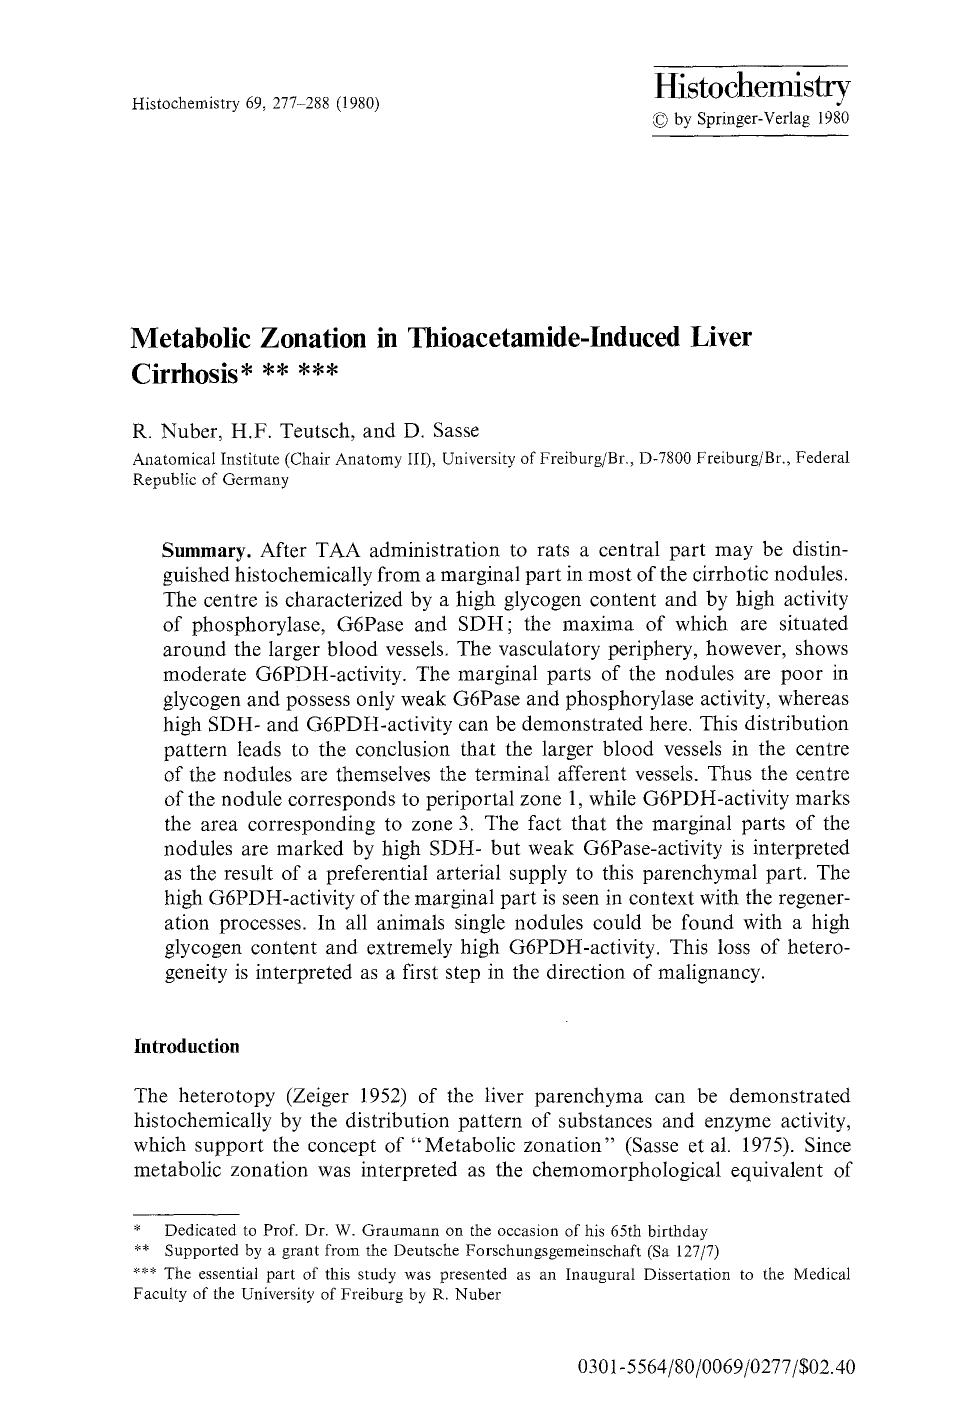 Metabolic zonation in thioacetamide-induced liver cirrhosis by Unknown